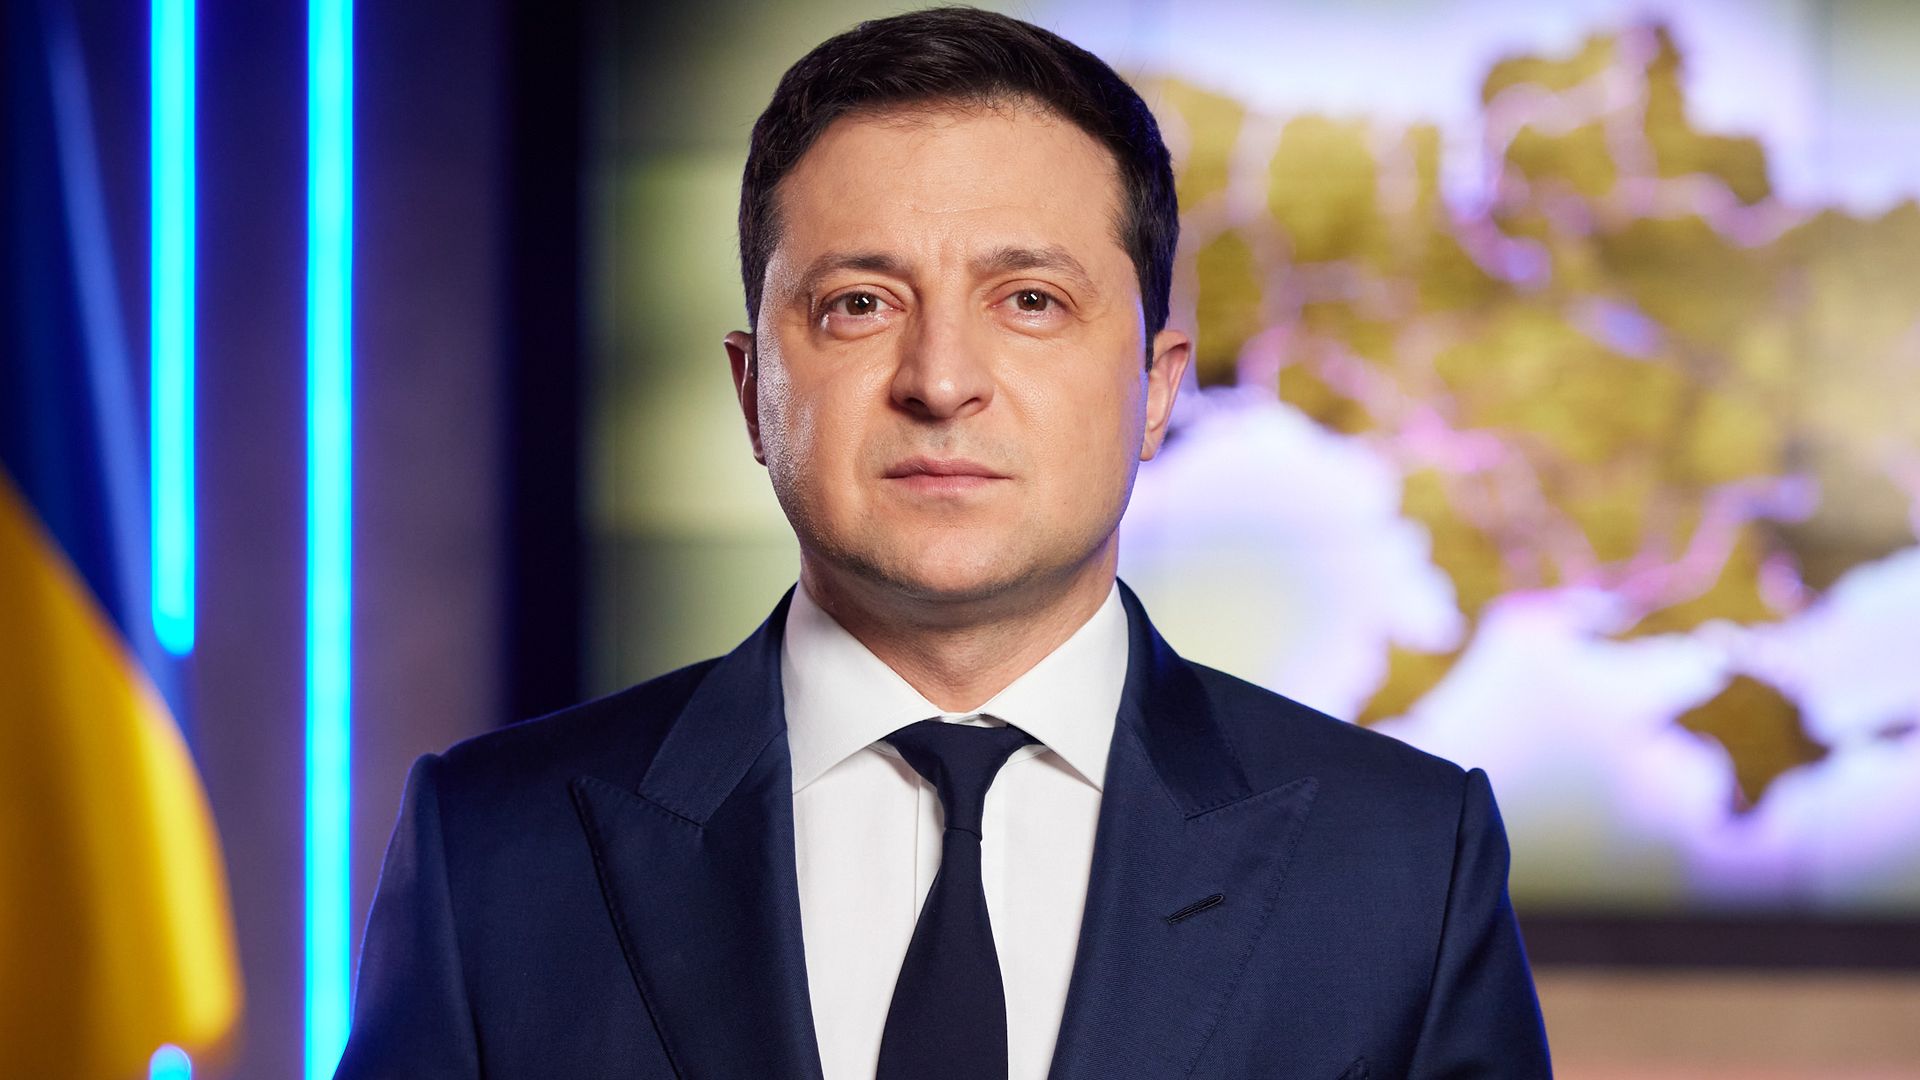 President Zelenskyy was the hero Ukraine needed in 2022-23. But in 2024, that might no longer be the case.